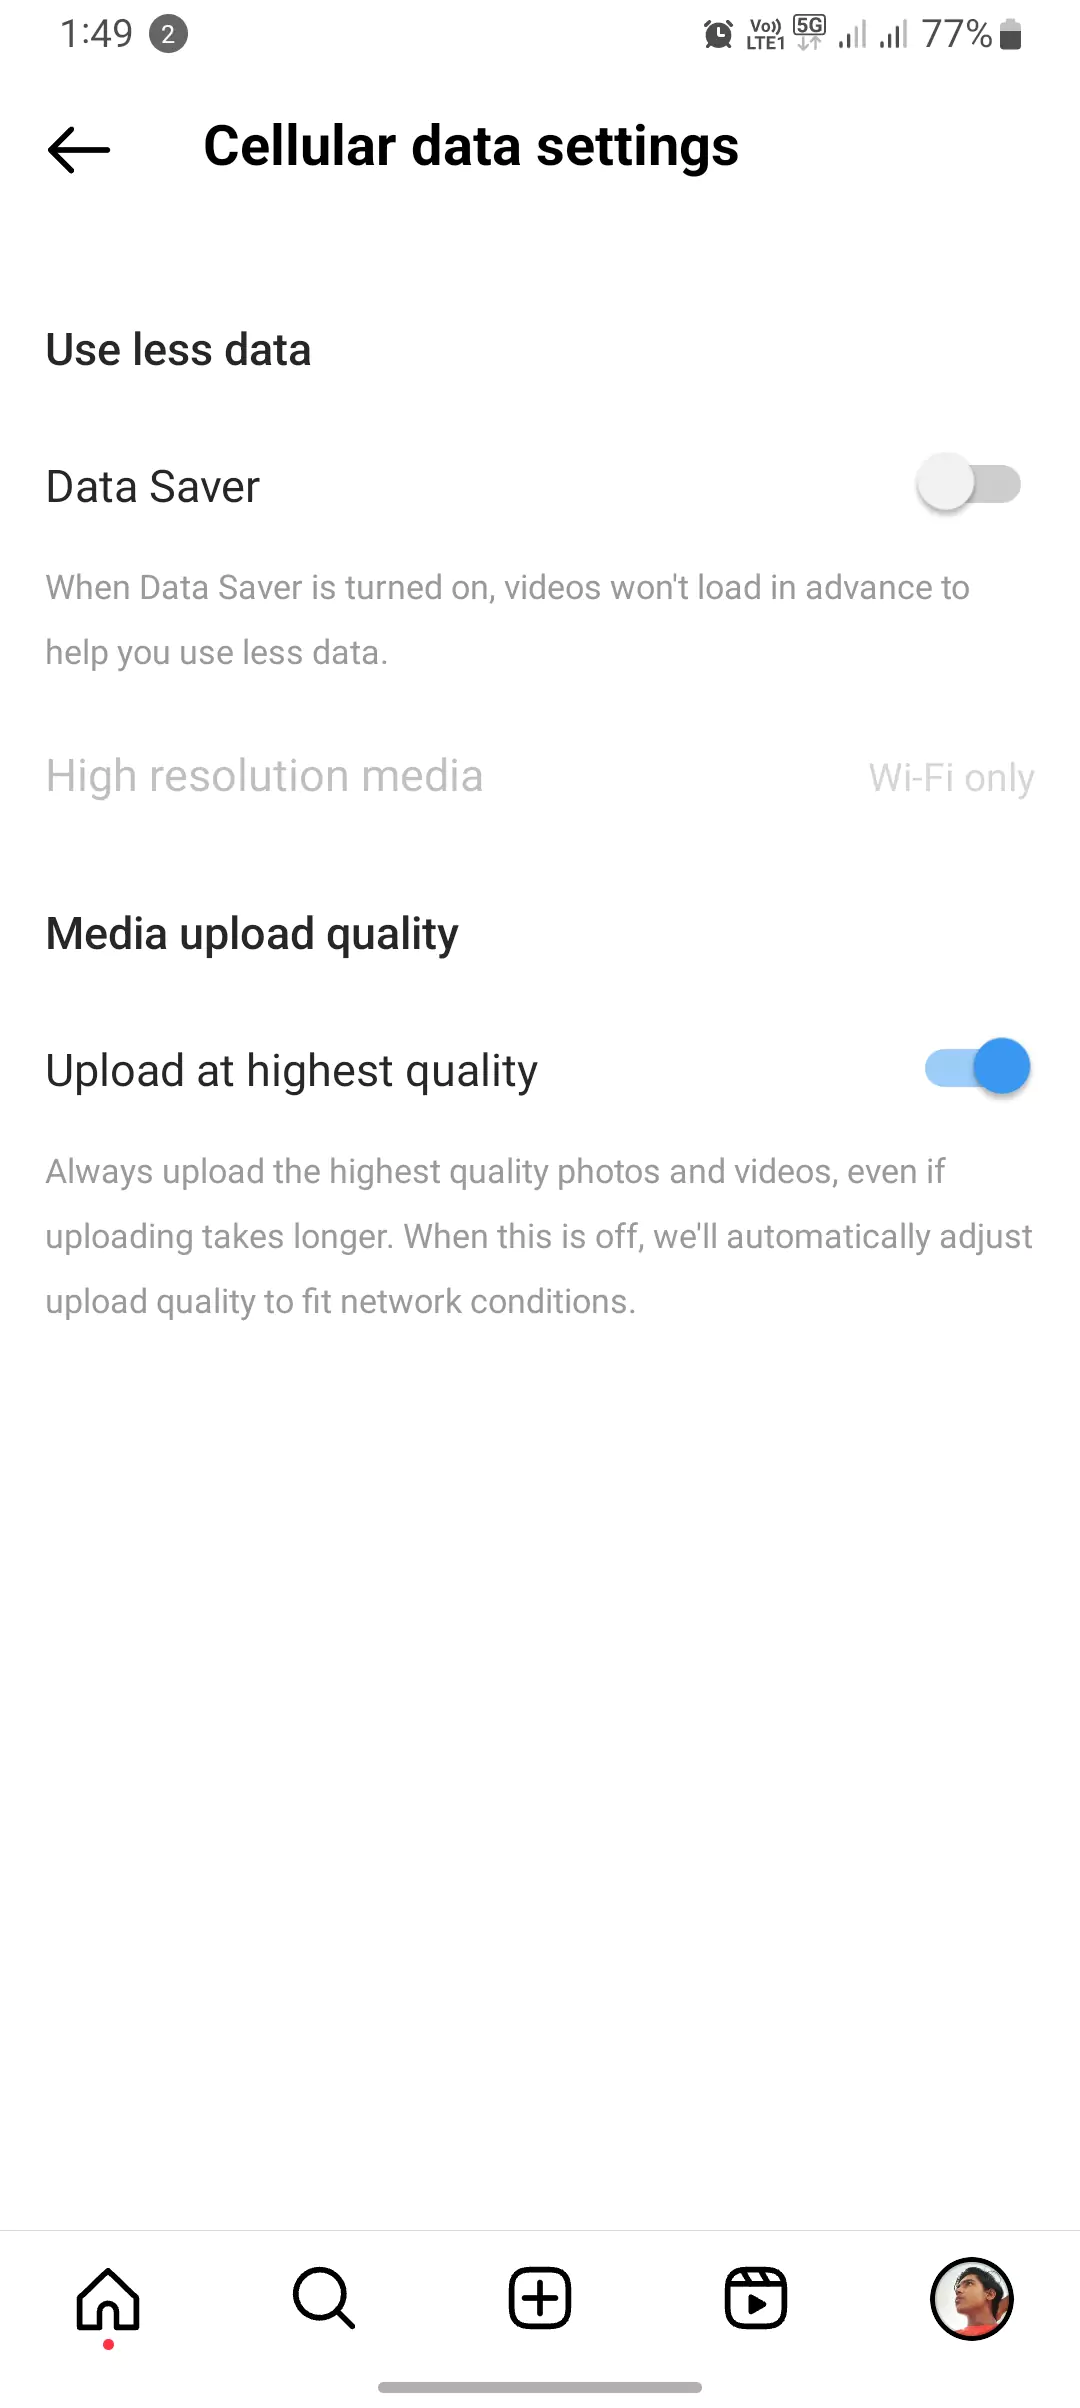 cellular data settings opened with data saver and media quality screenshot from instagram setting